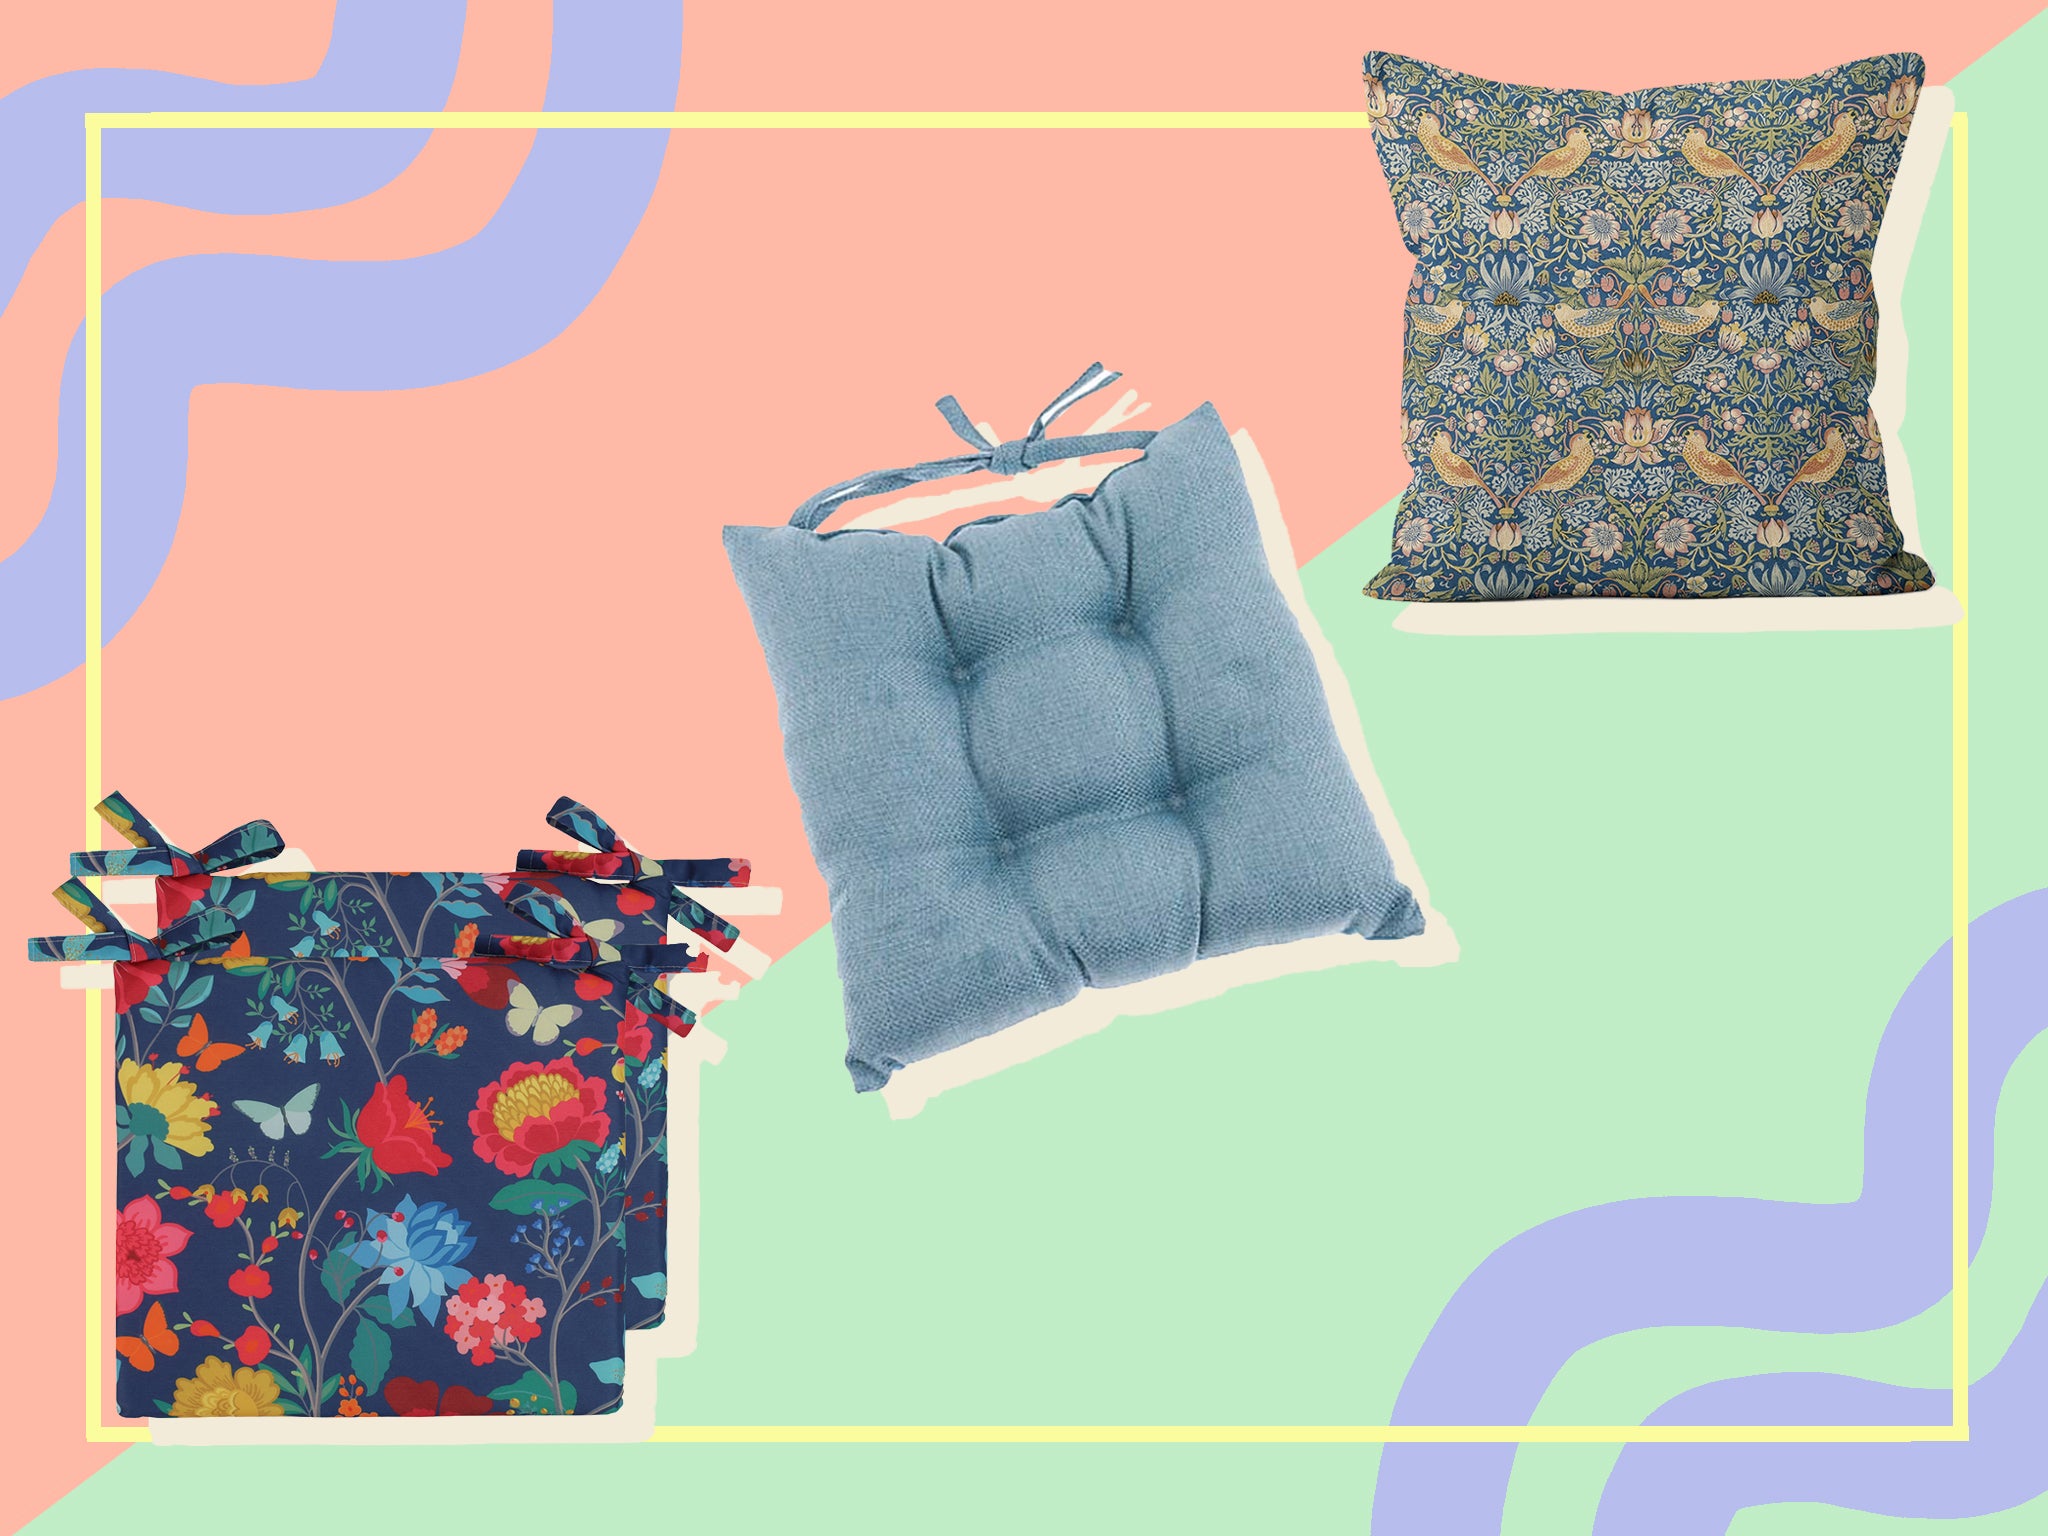 Best outdoor cushions 2020: Waterproof pillows to brighten up your